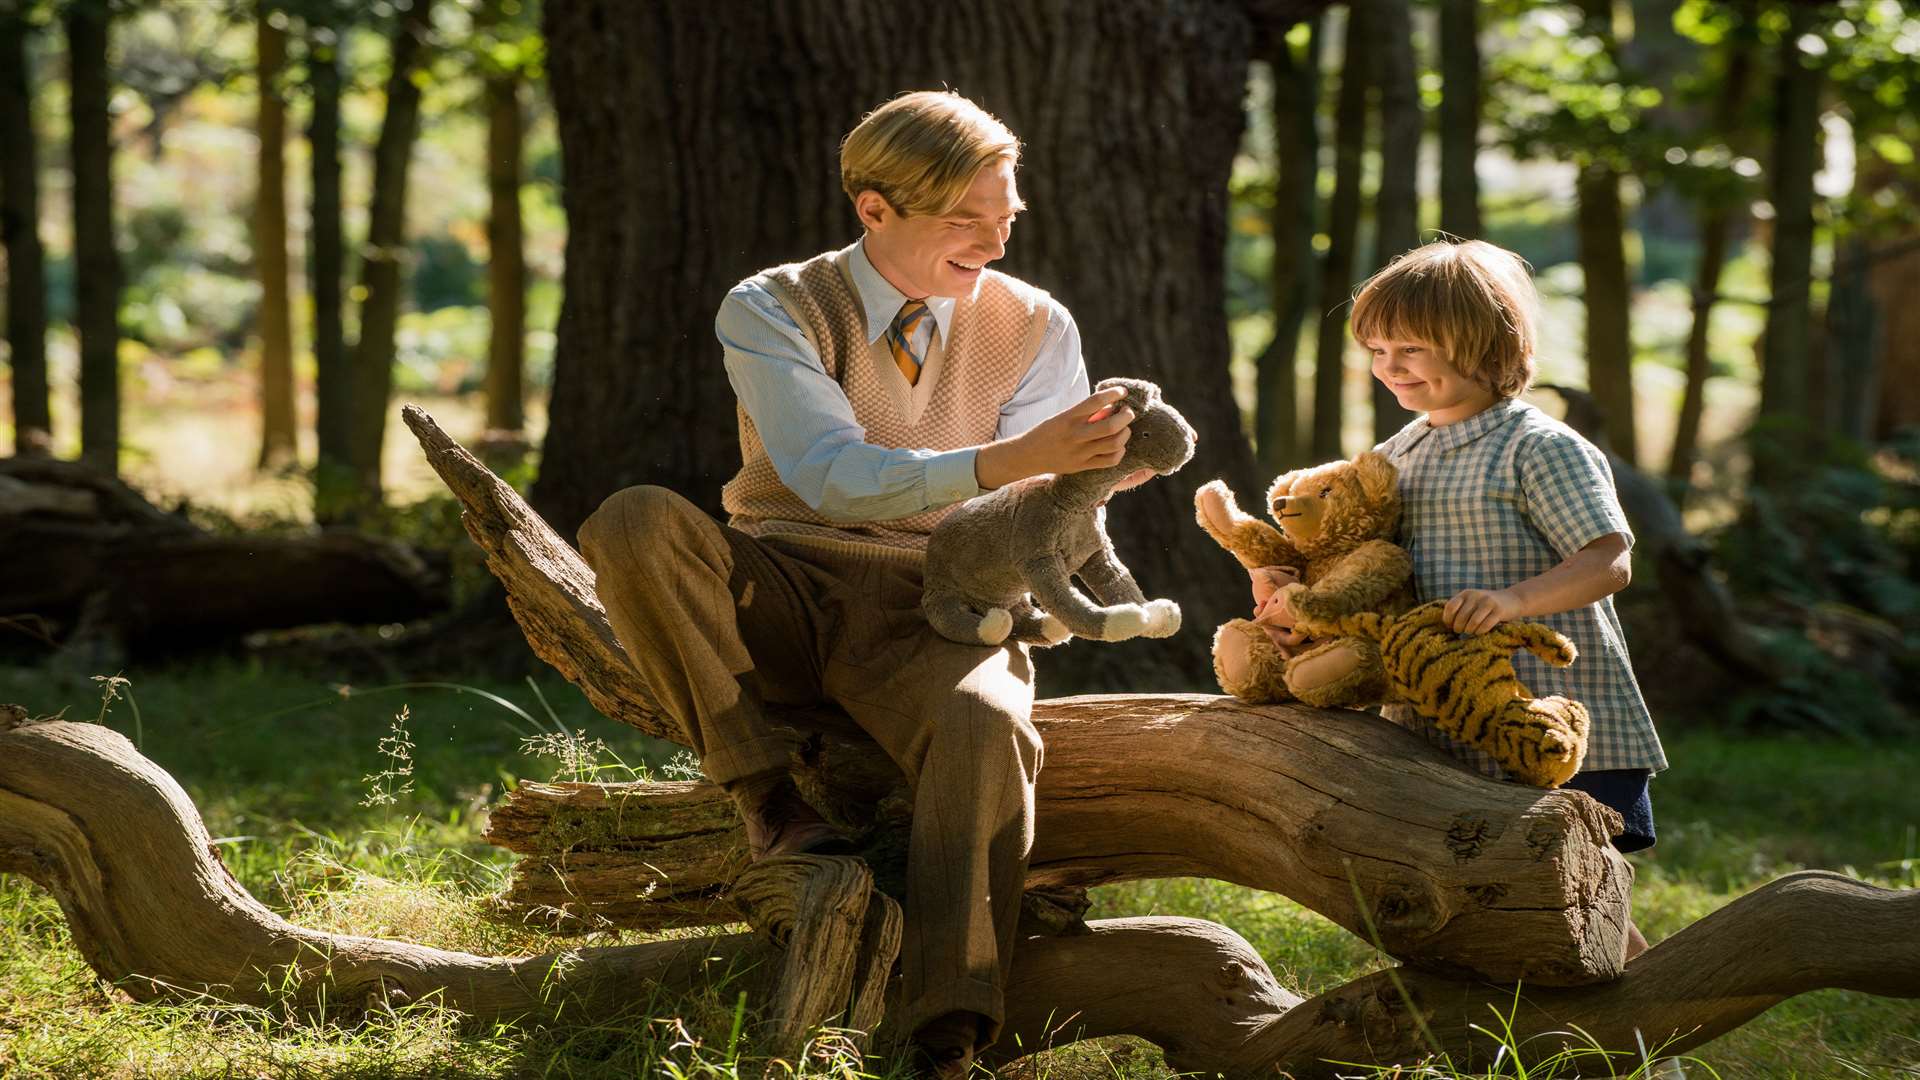 Domhnall Gleeson as Alan Milne and Will Tilston as Christopher Robin Milne in the new film Goodbye Christopher Robin